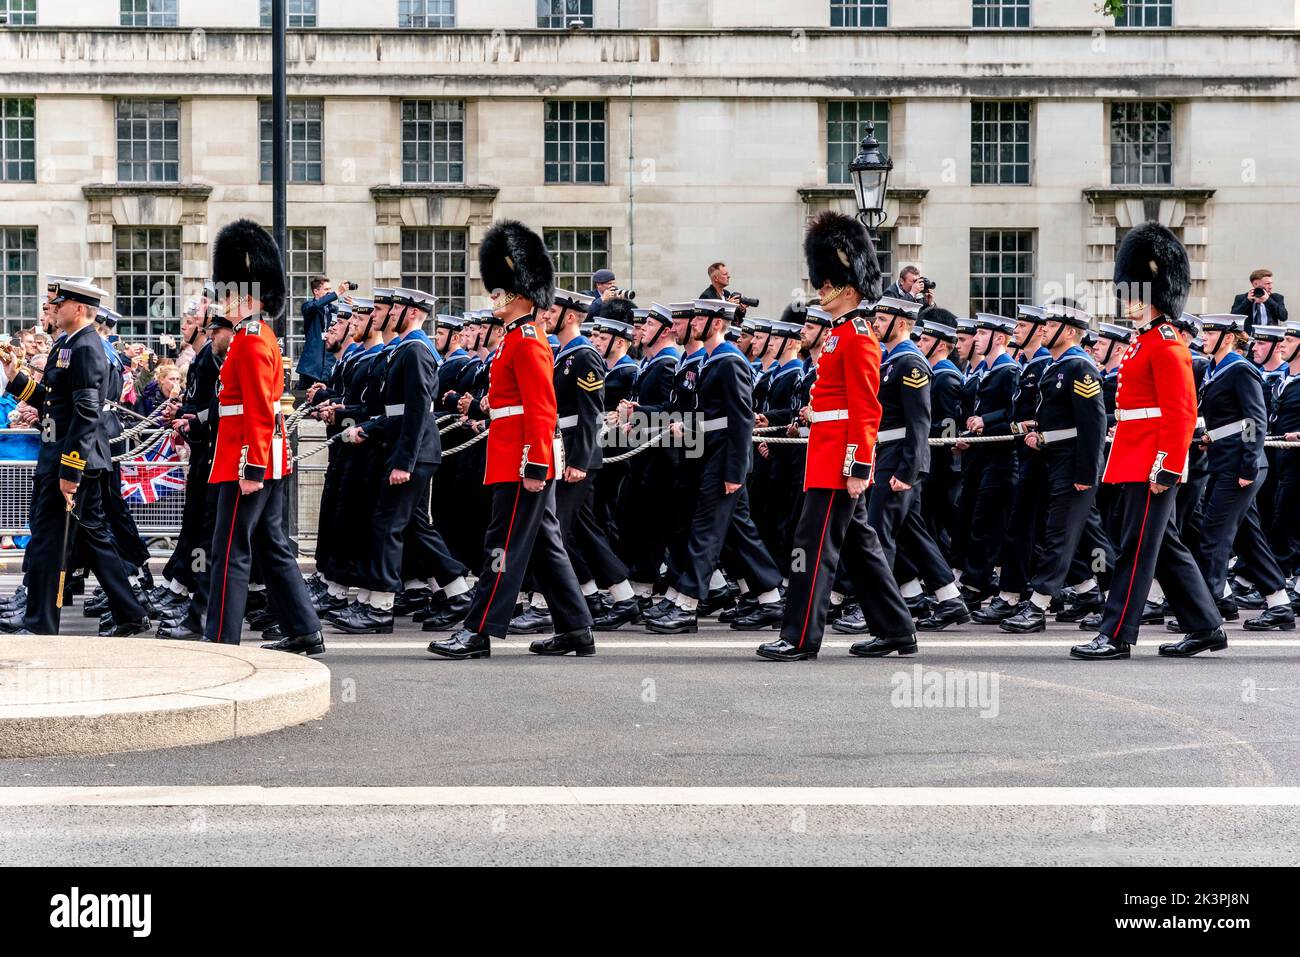 Naval Ratings Pull The State Gun Carriage and Coffin As Part Of The Funeral Procession Of Queen Elizabeth II, Whitehall, London, UK. Stock Photo